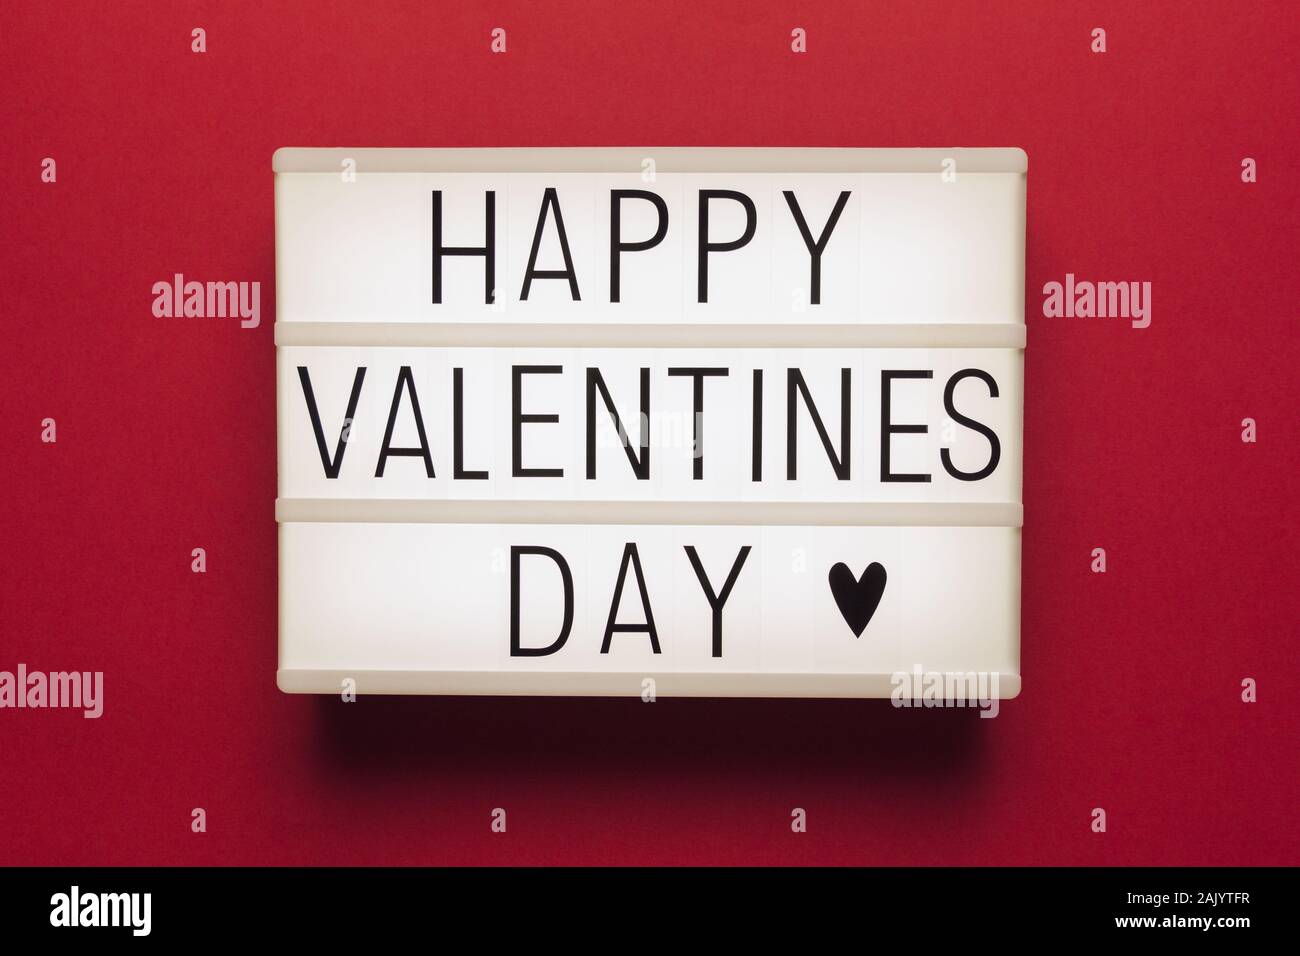 Stock photo of a white light box, on a red background and black letters with the text 'Happy Valentines Day' Stock Photo